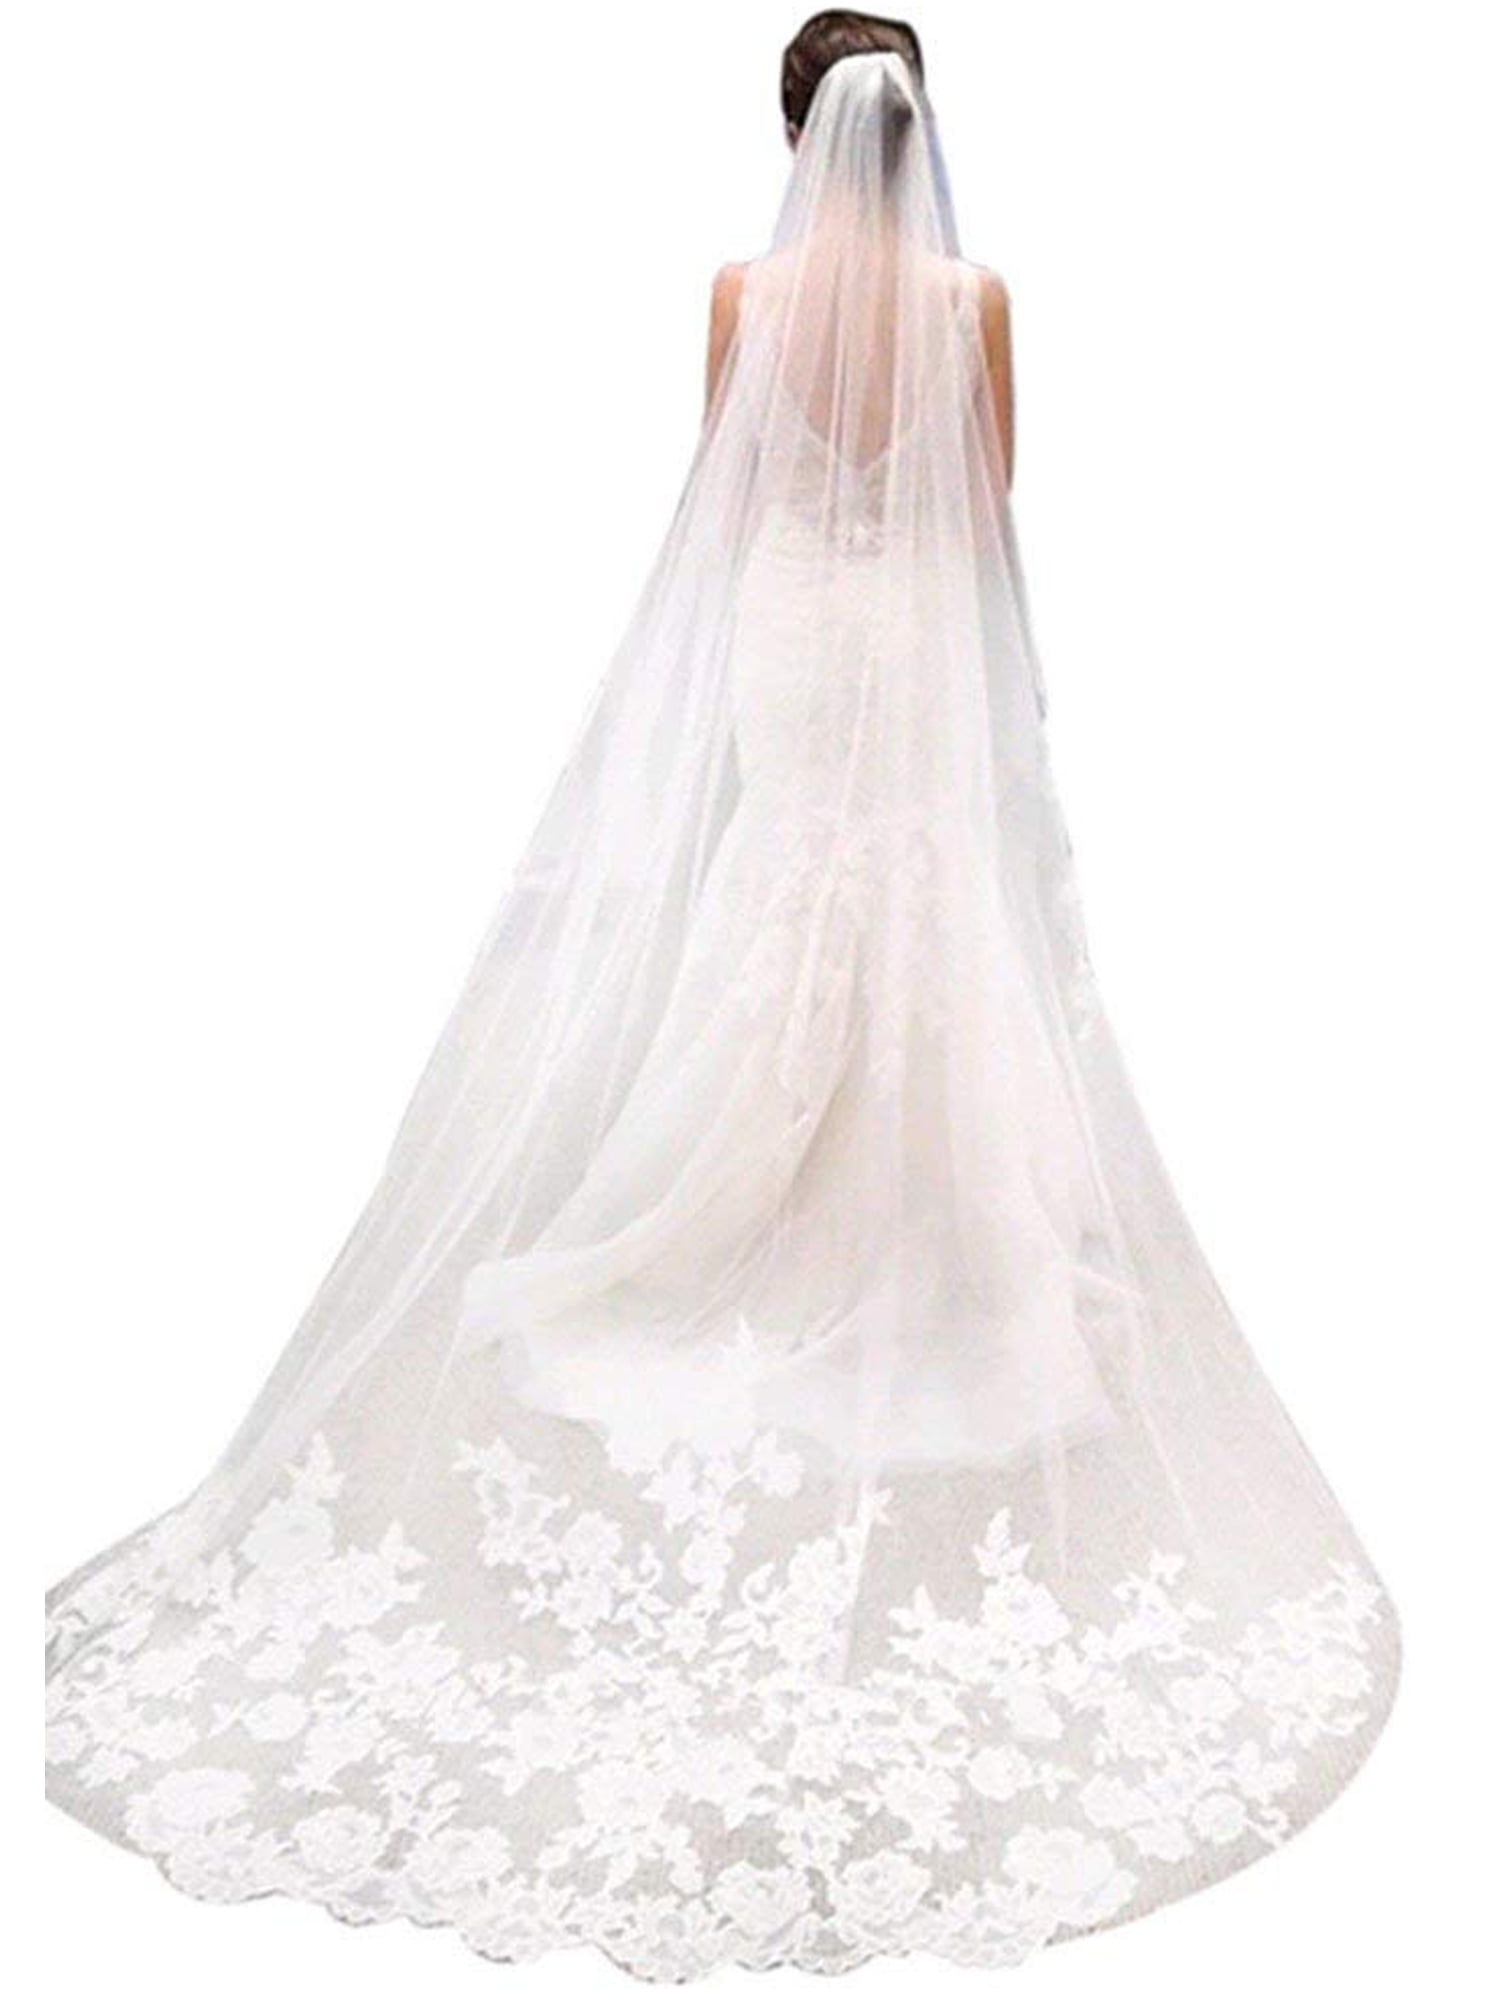 Cathedral Long Floor Party Wedding Veil Tier With Lace Edge Bridal Headpieces 3M 